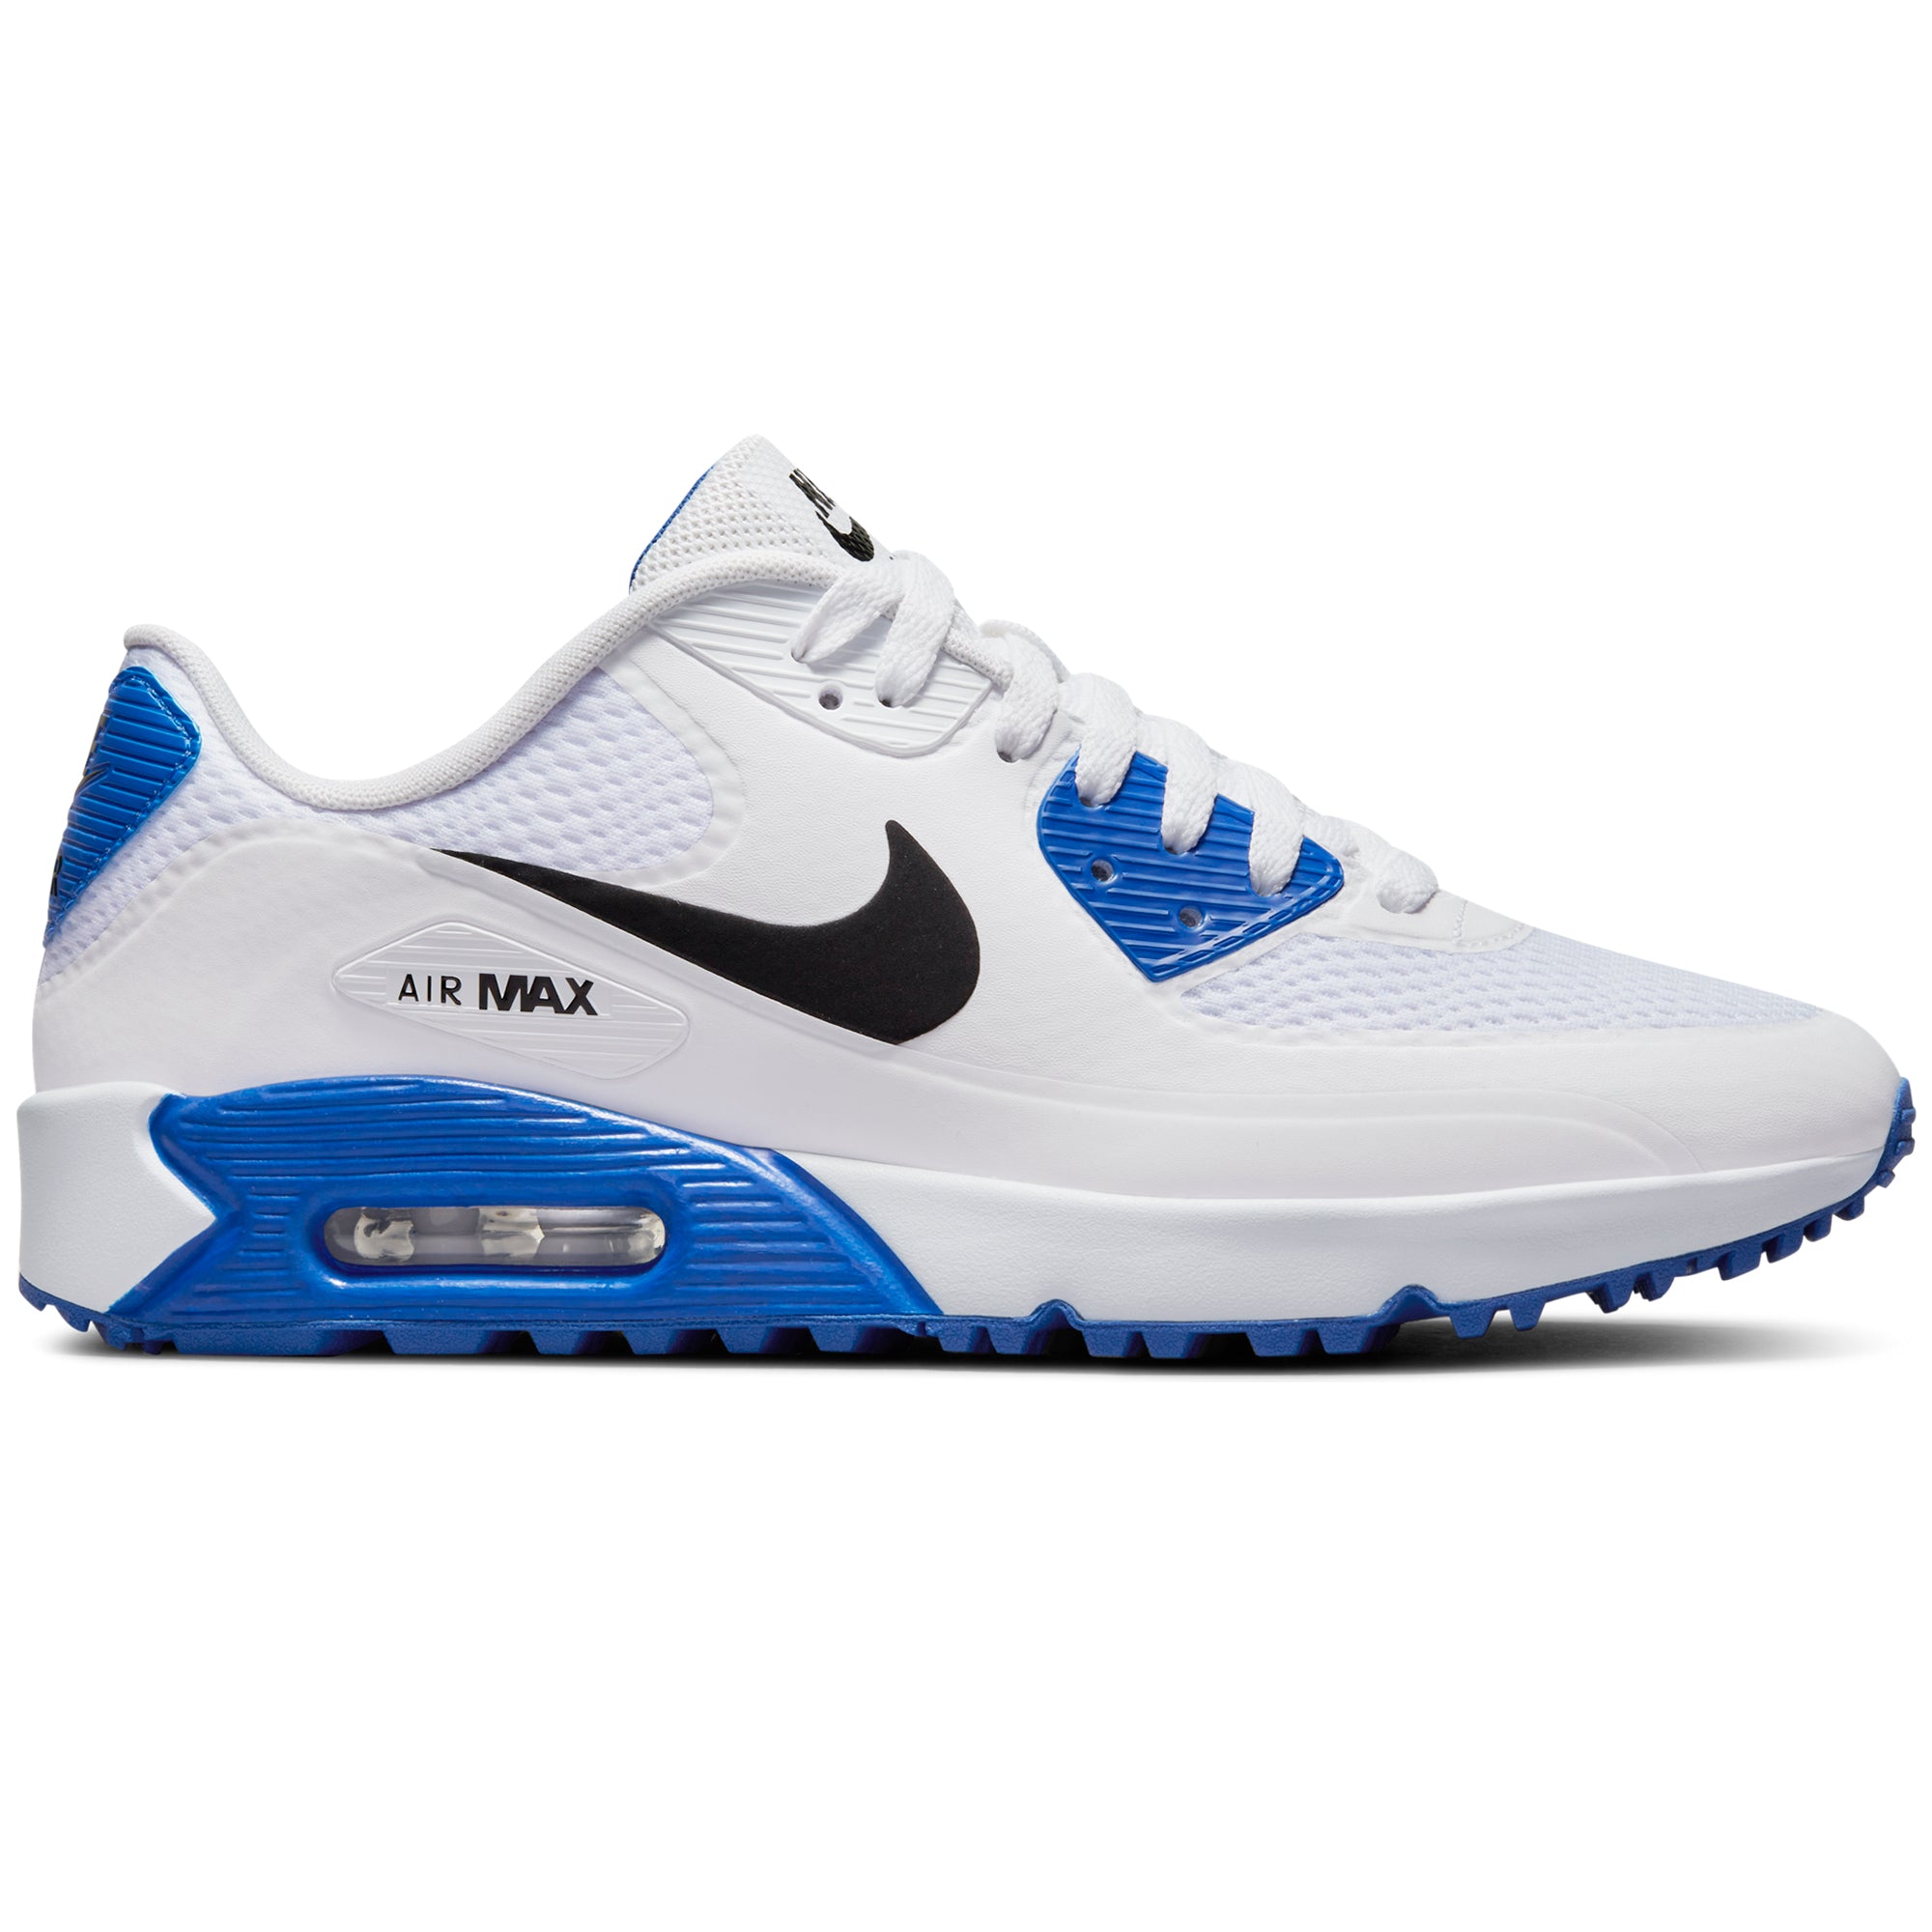 Nike Golf Air Max 90 G Shoes CU9978 White Racer Blue 106 | Function18